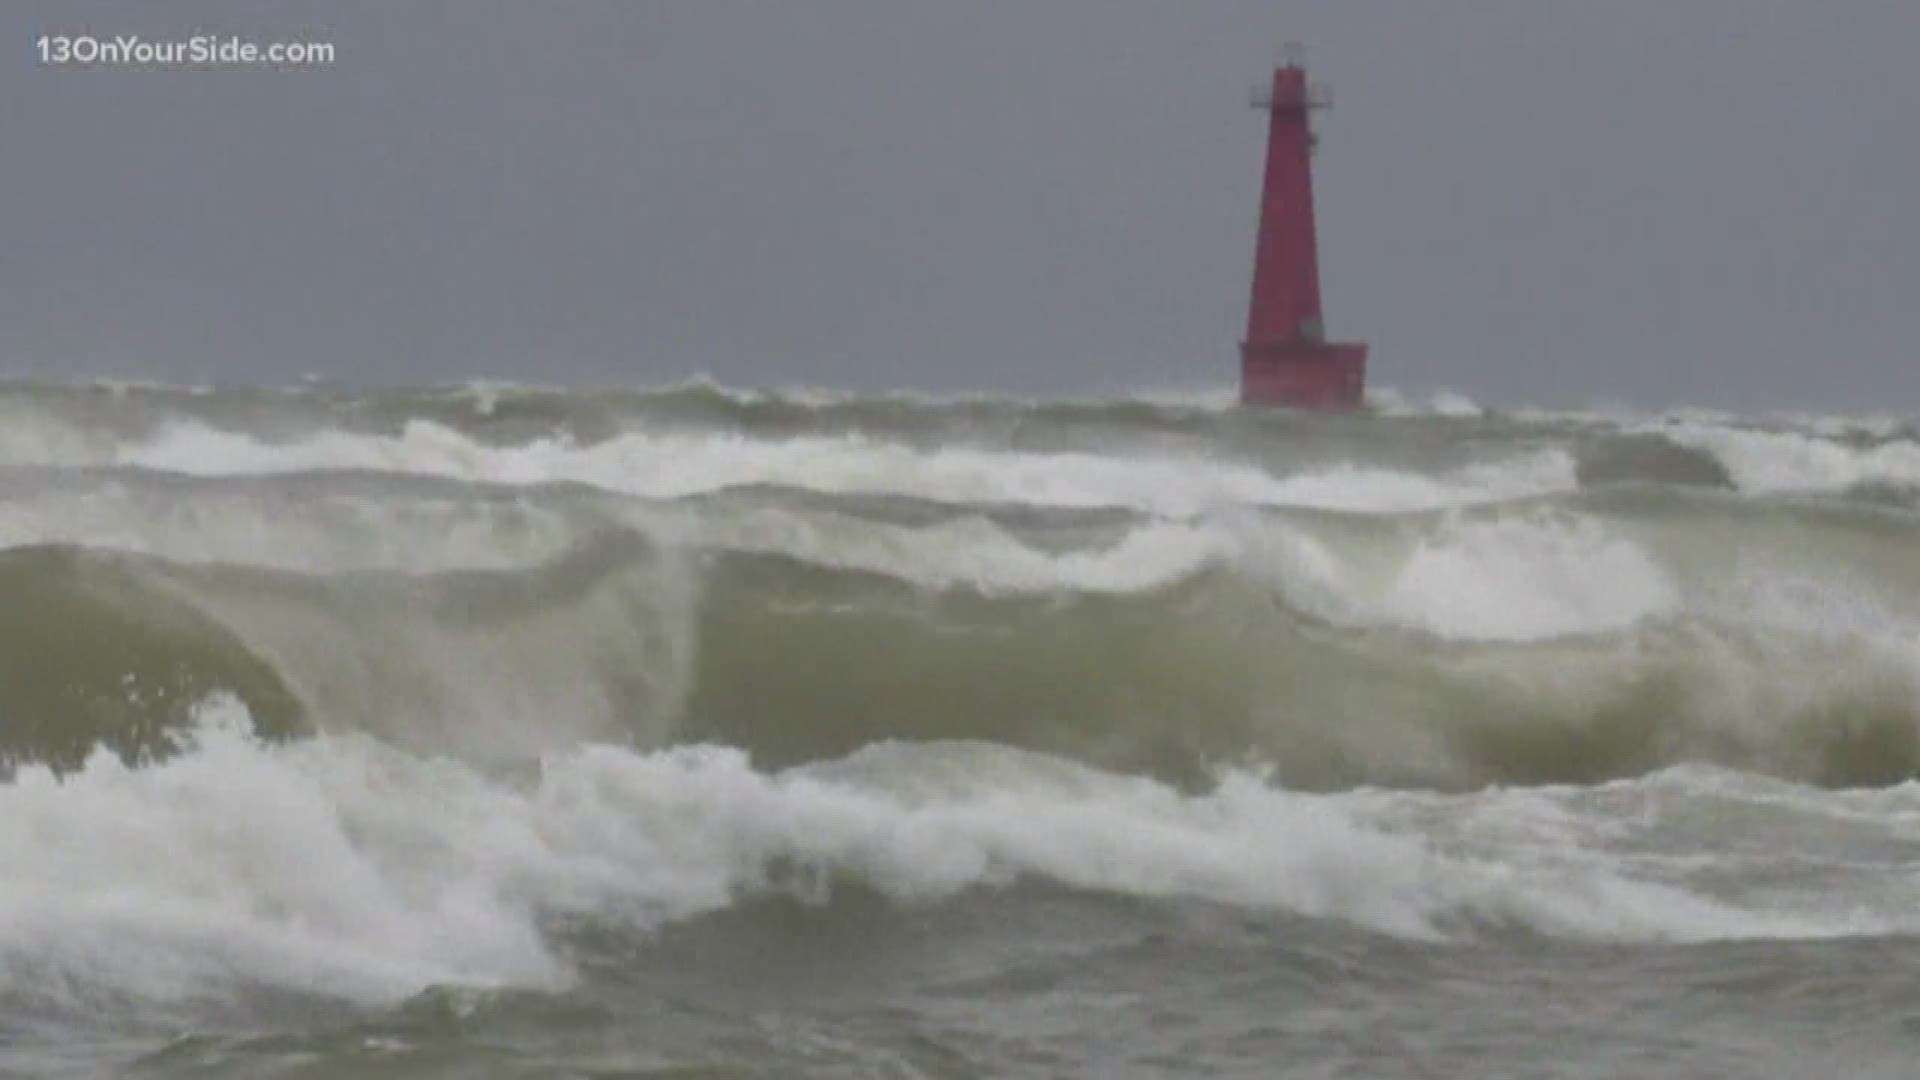 High water and winds upwards of 40 mph caused waves on Lake Michigan to crash along the lakeshore Wednesday.